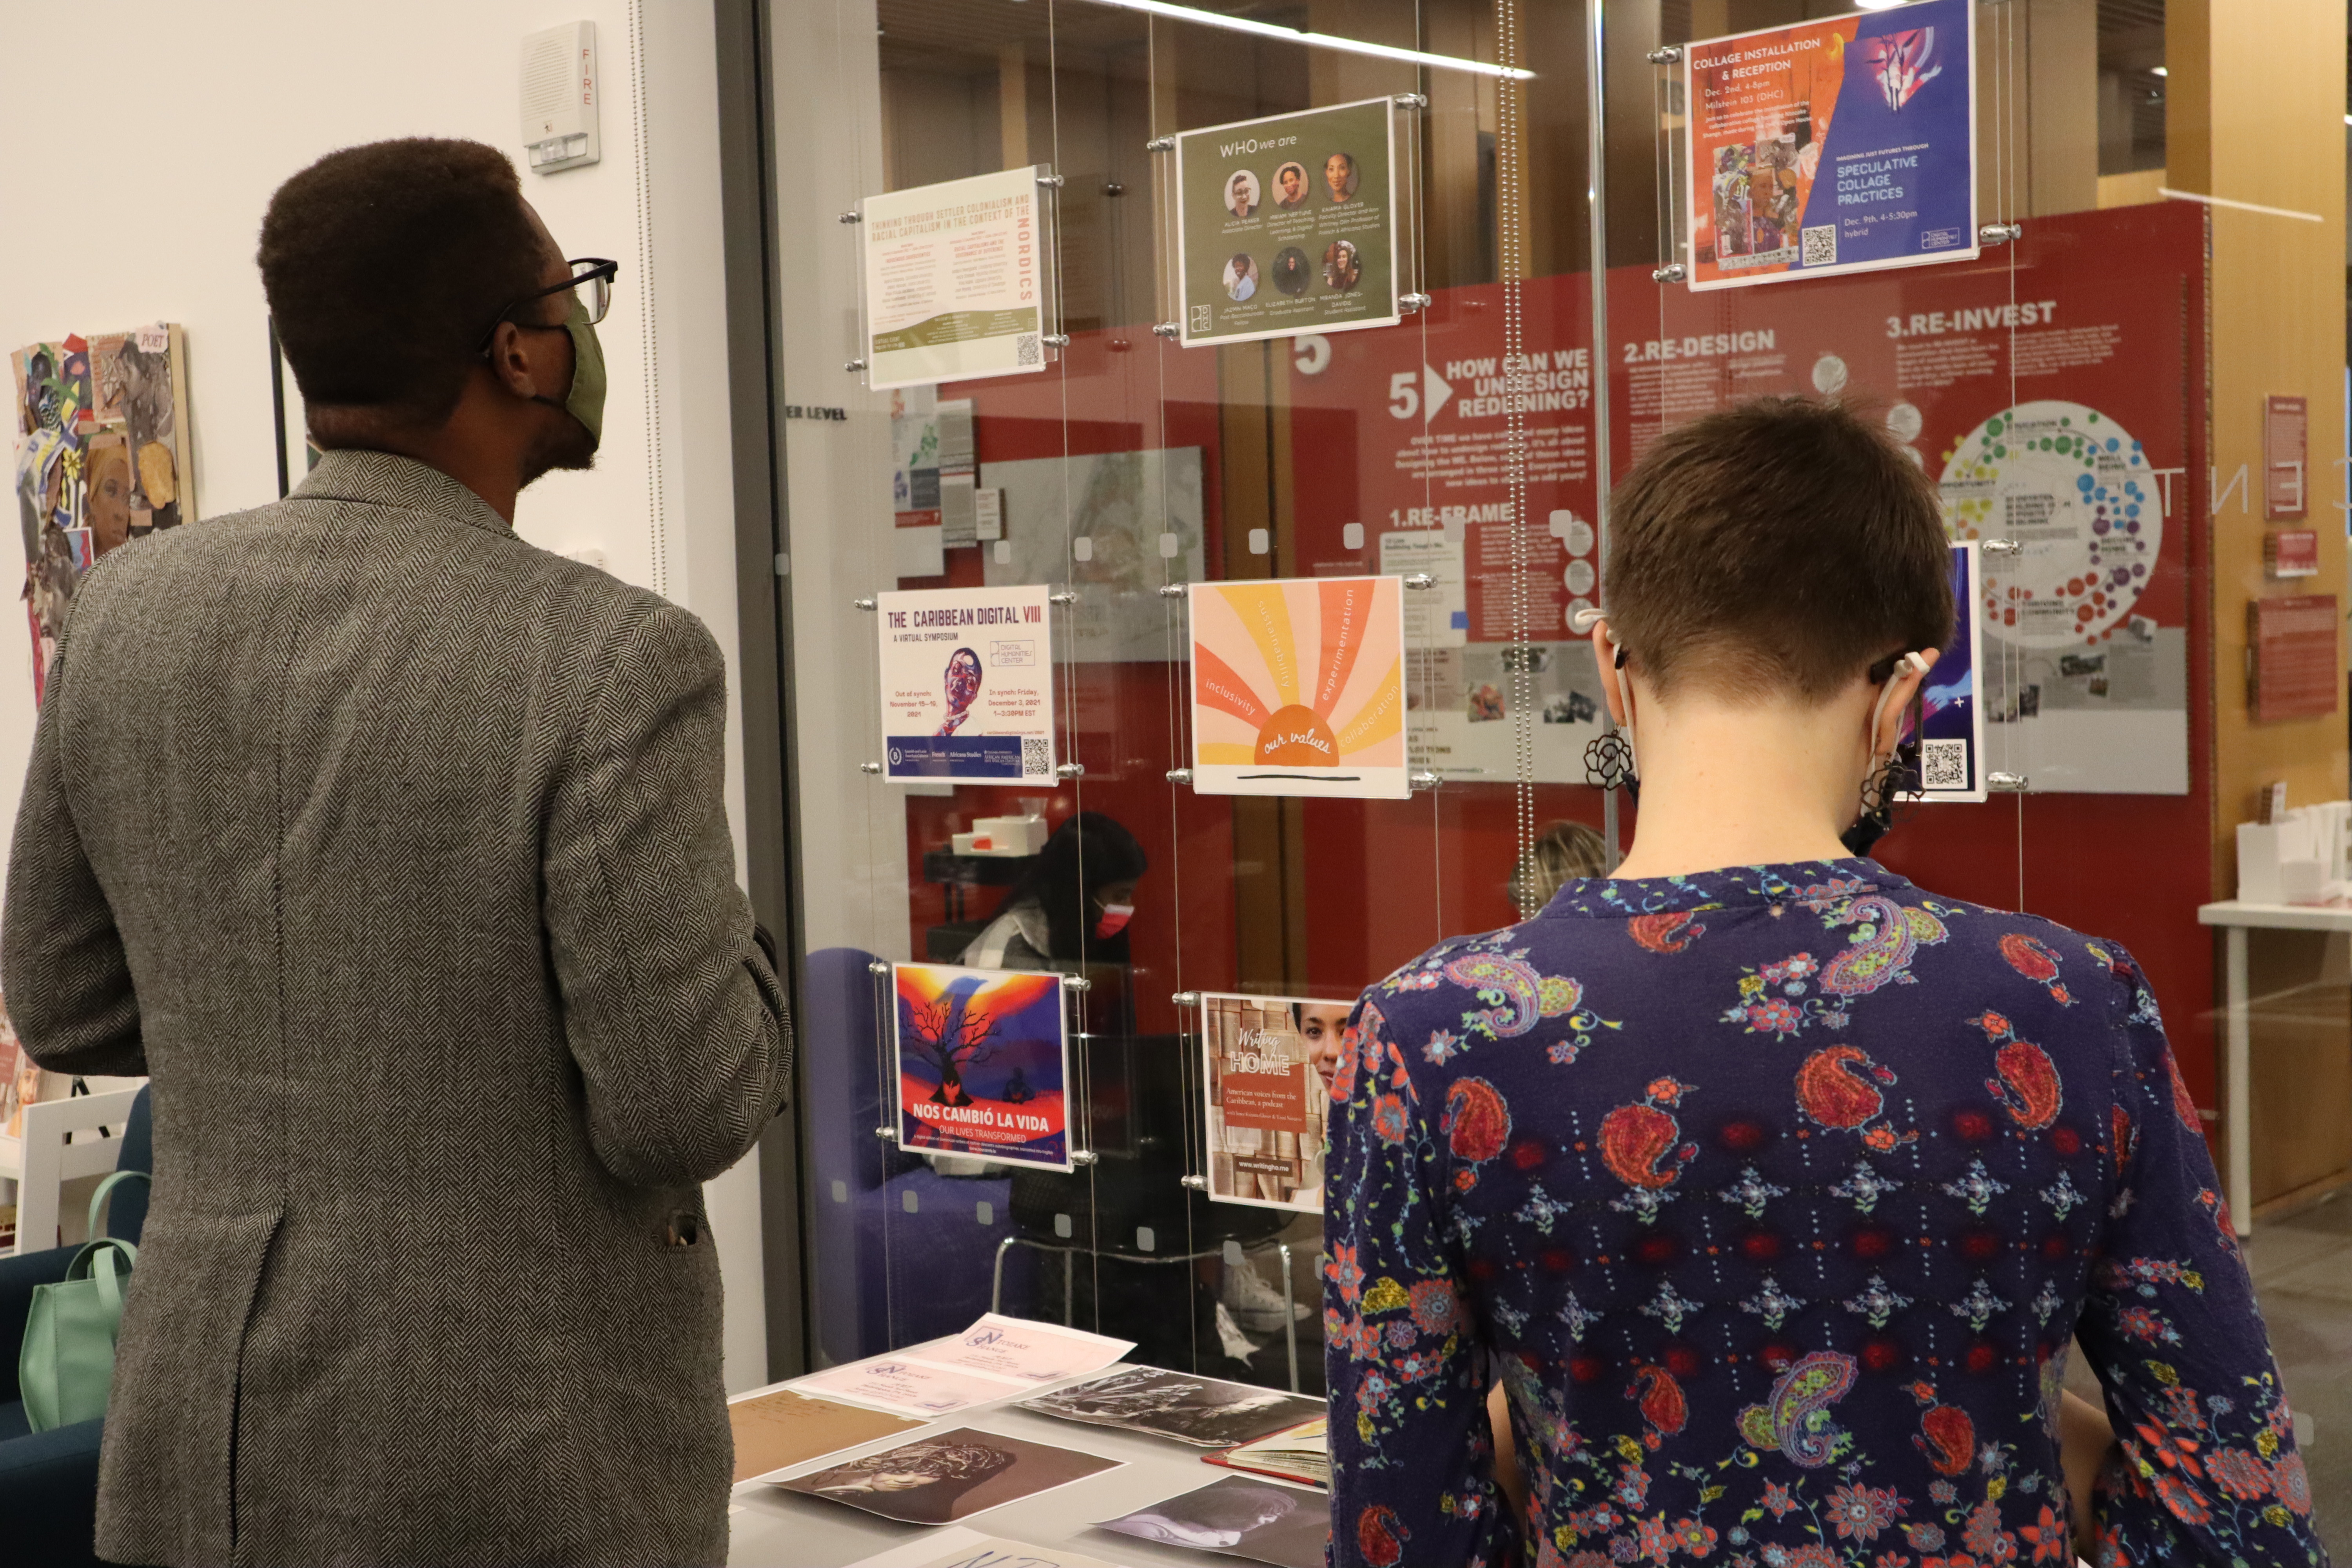 Two people are seen visiting the DHC Collage Reception